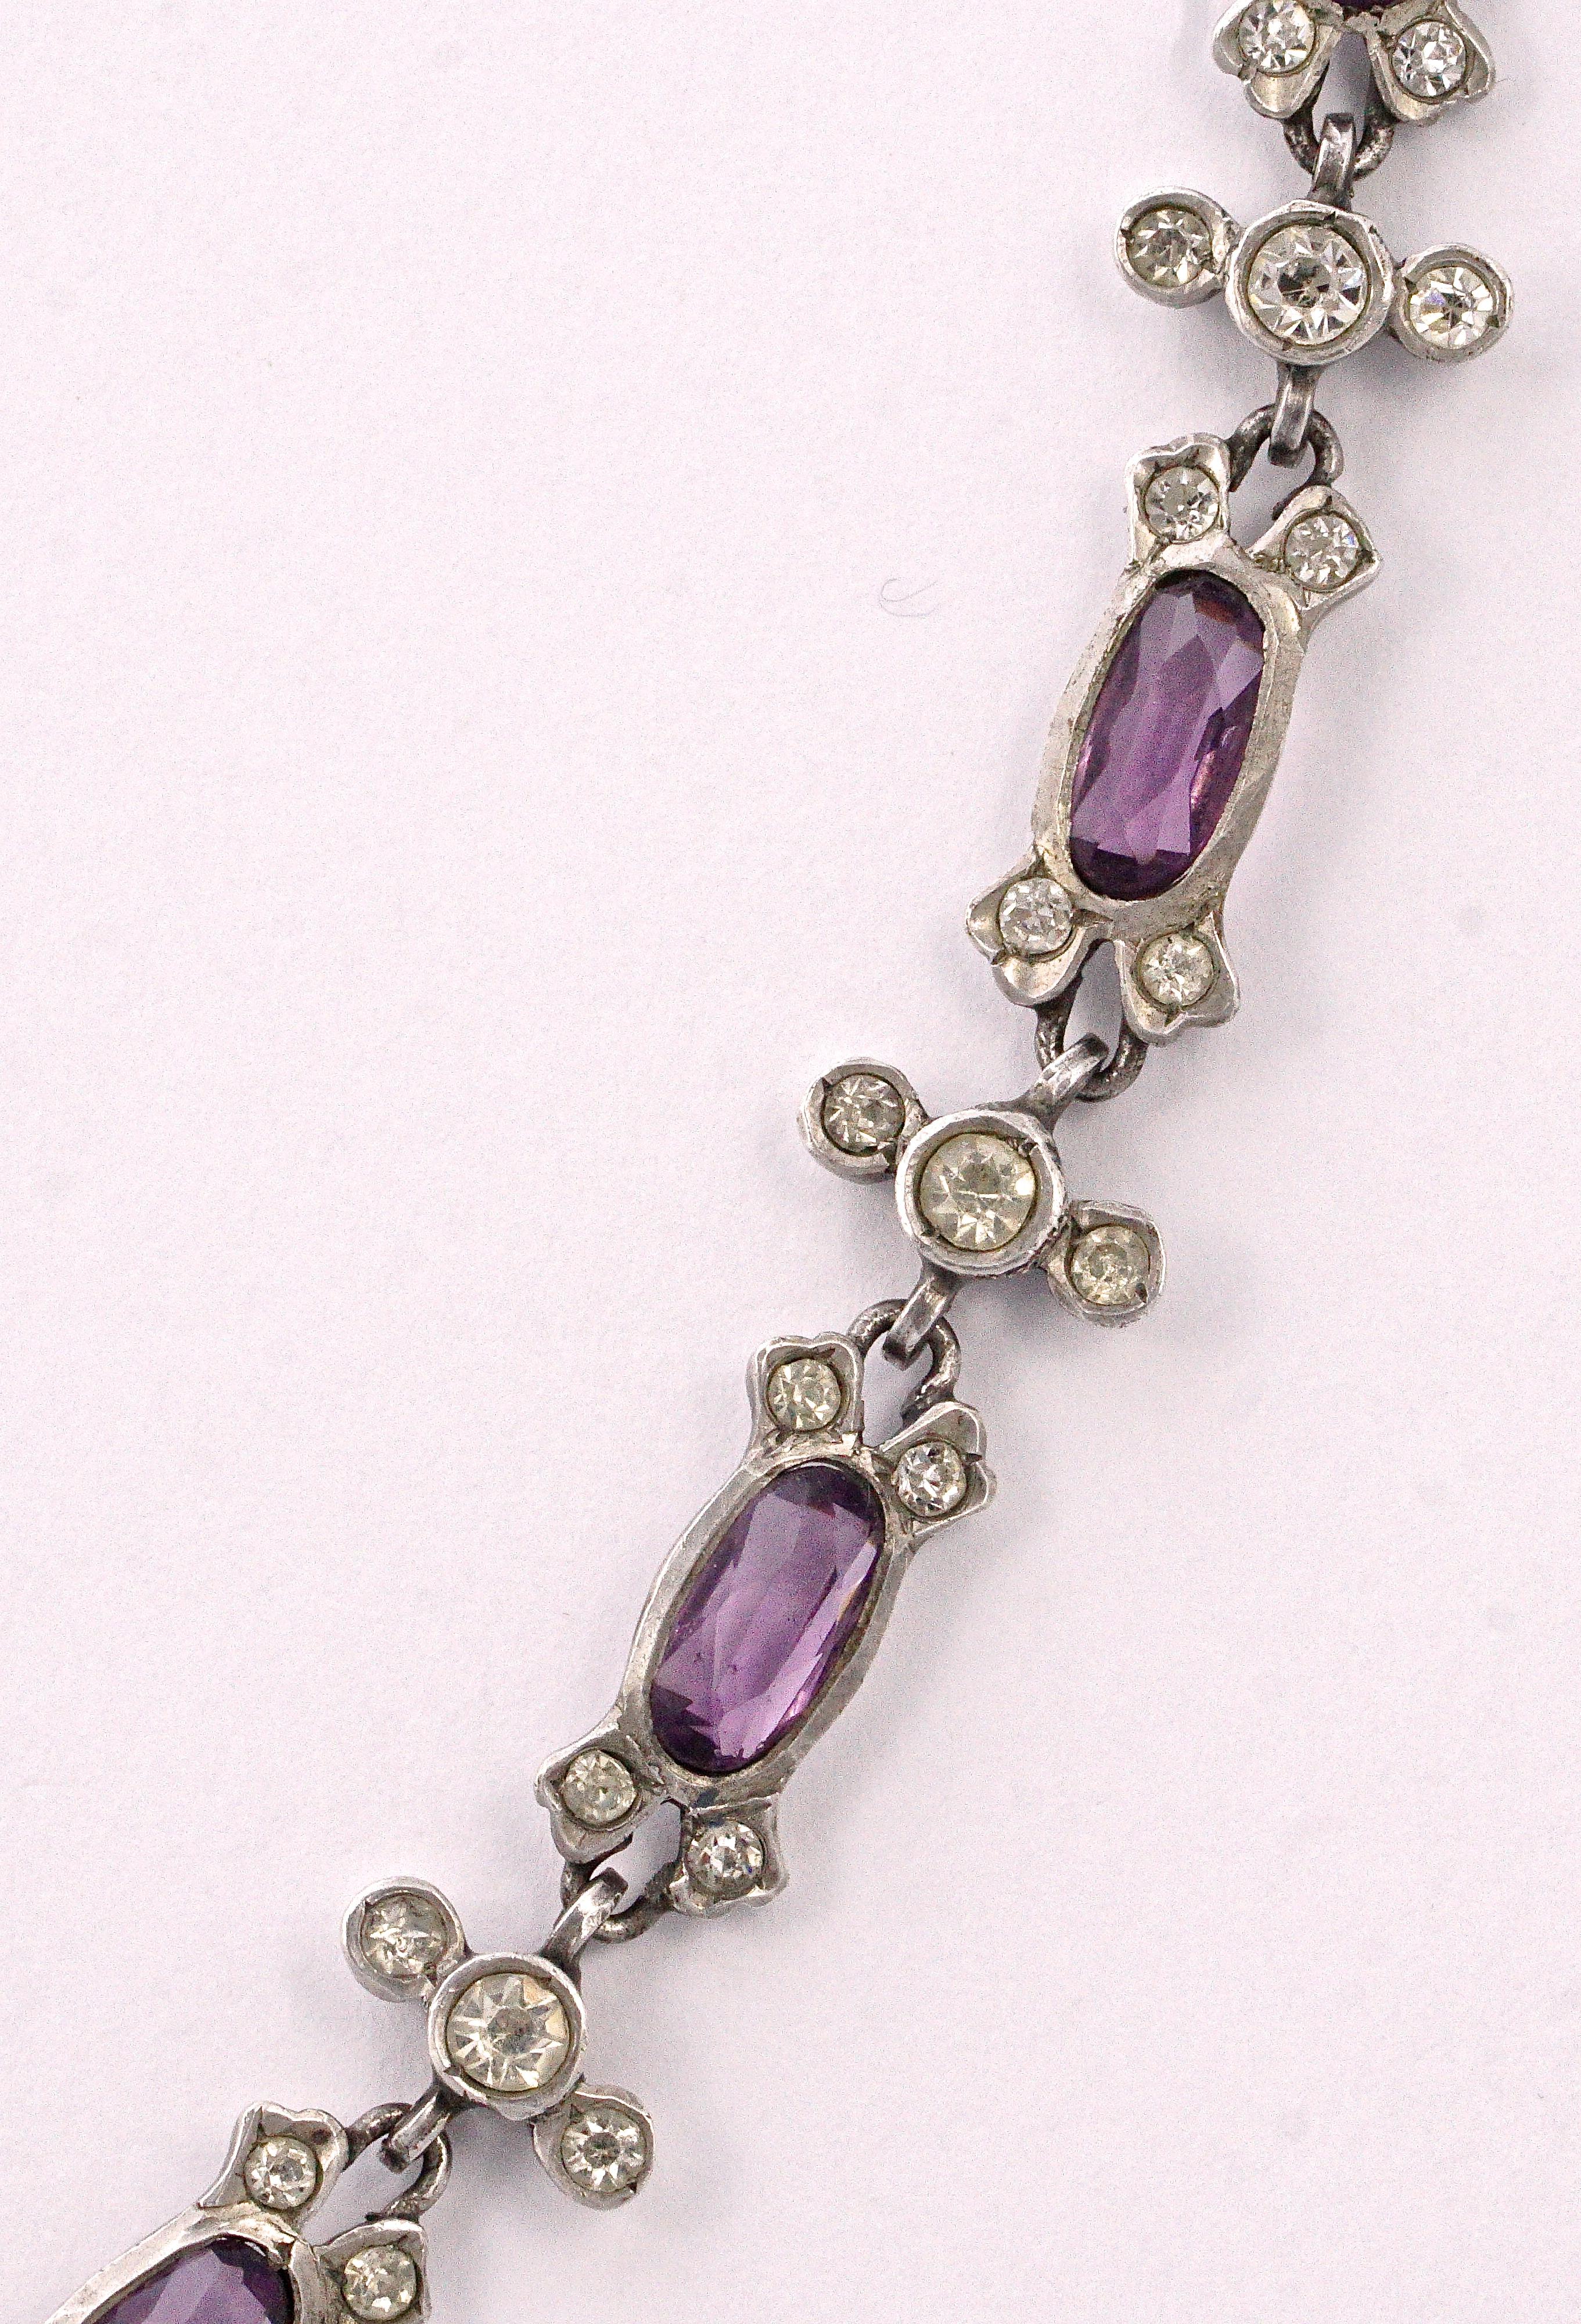 Antique Sterling Silver Lavalier Necklace with White and Amethyst Paste Stones In Good Condition For Sale In London, GB